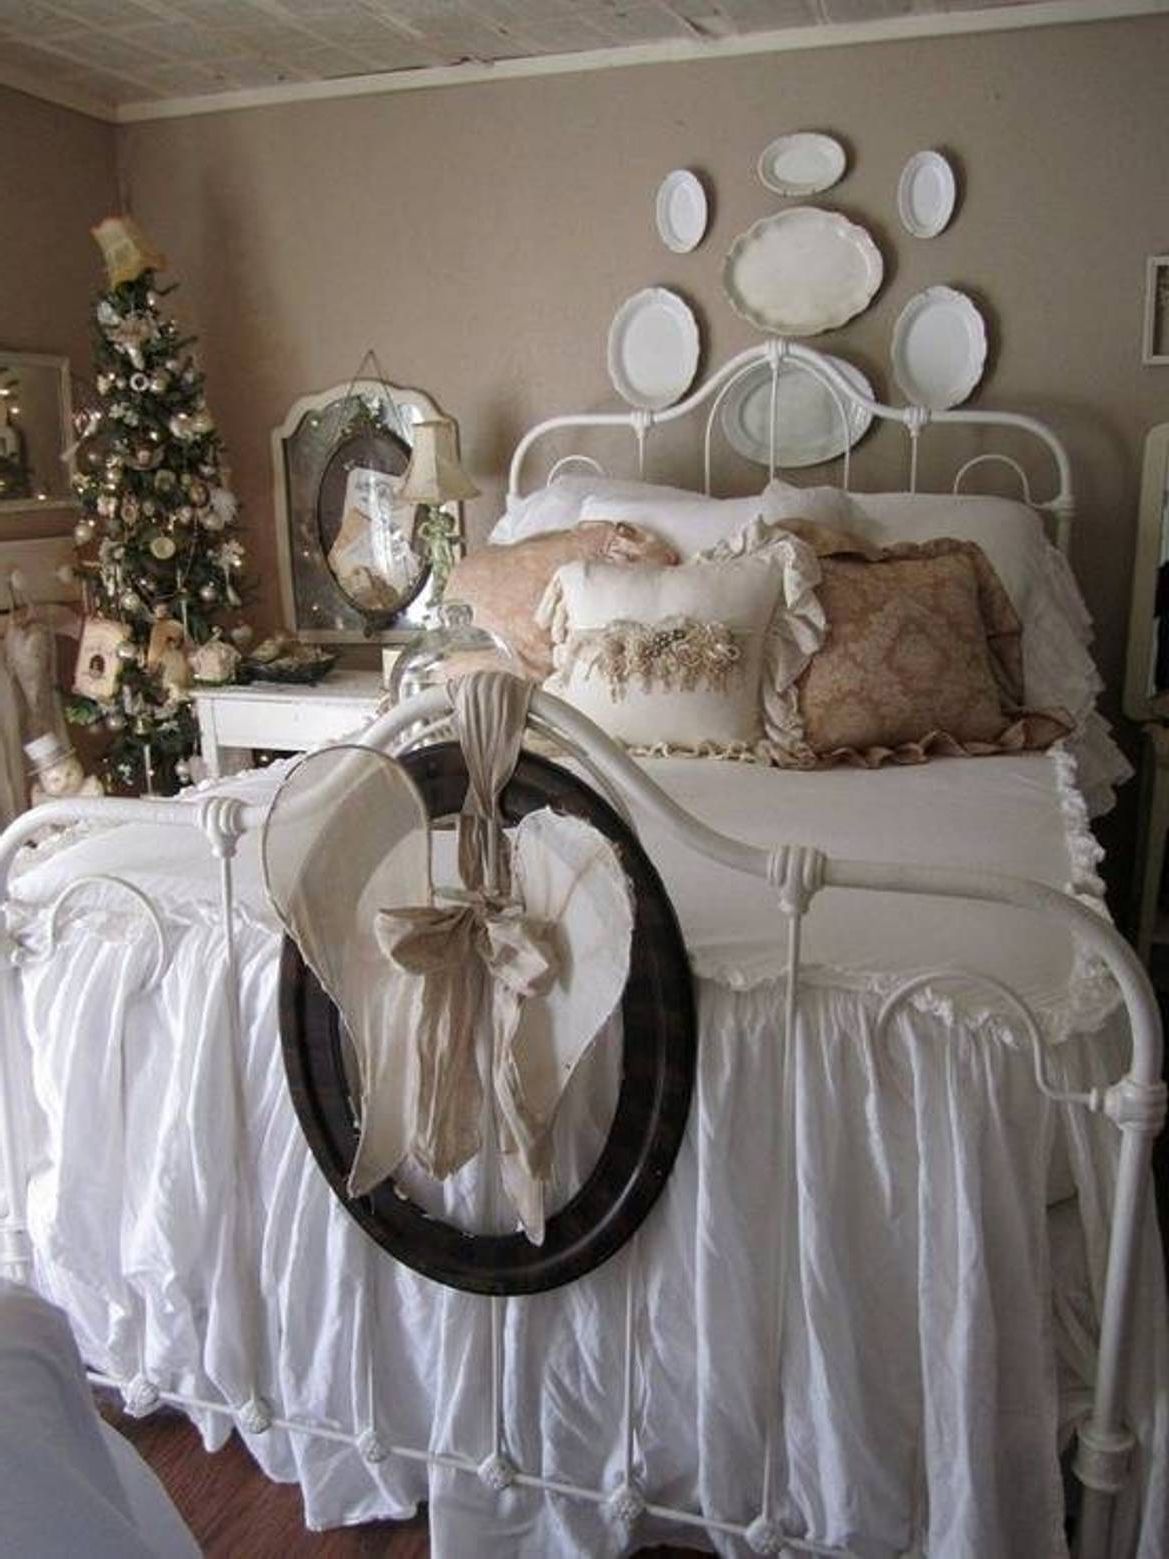 Shabby Chic White Christmas Themed Bedroom Decoration With Christmas Tree And White Bedding Set